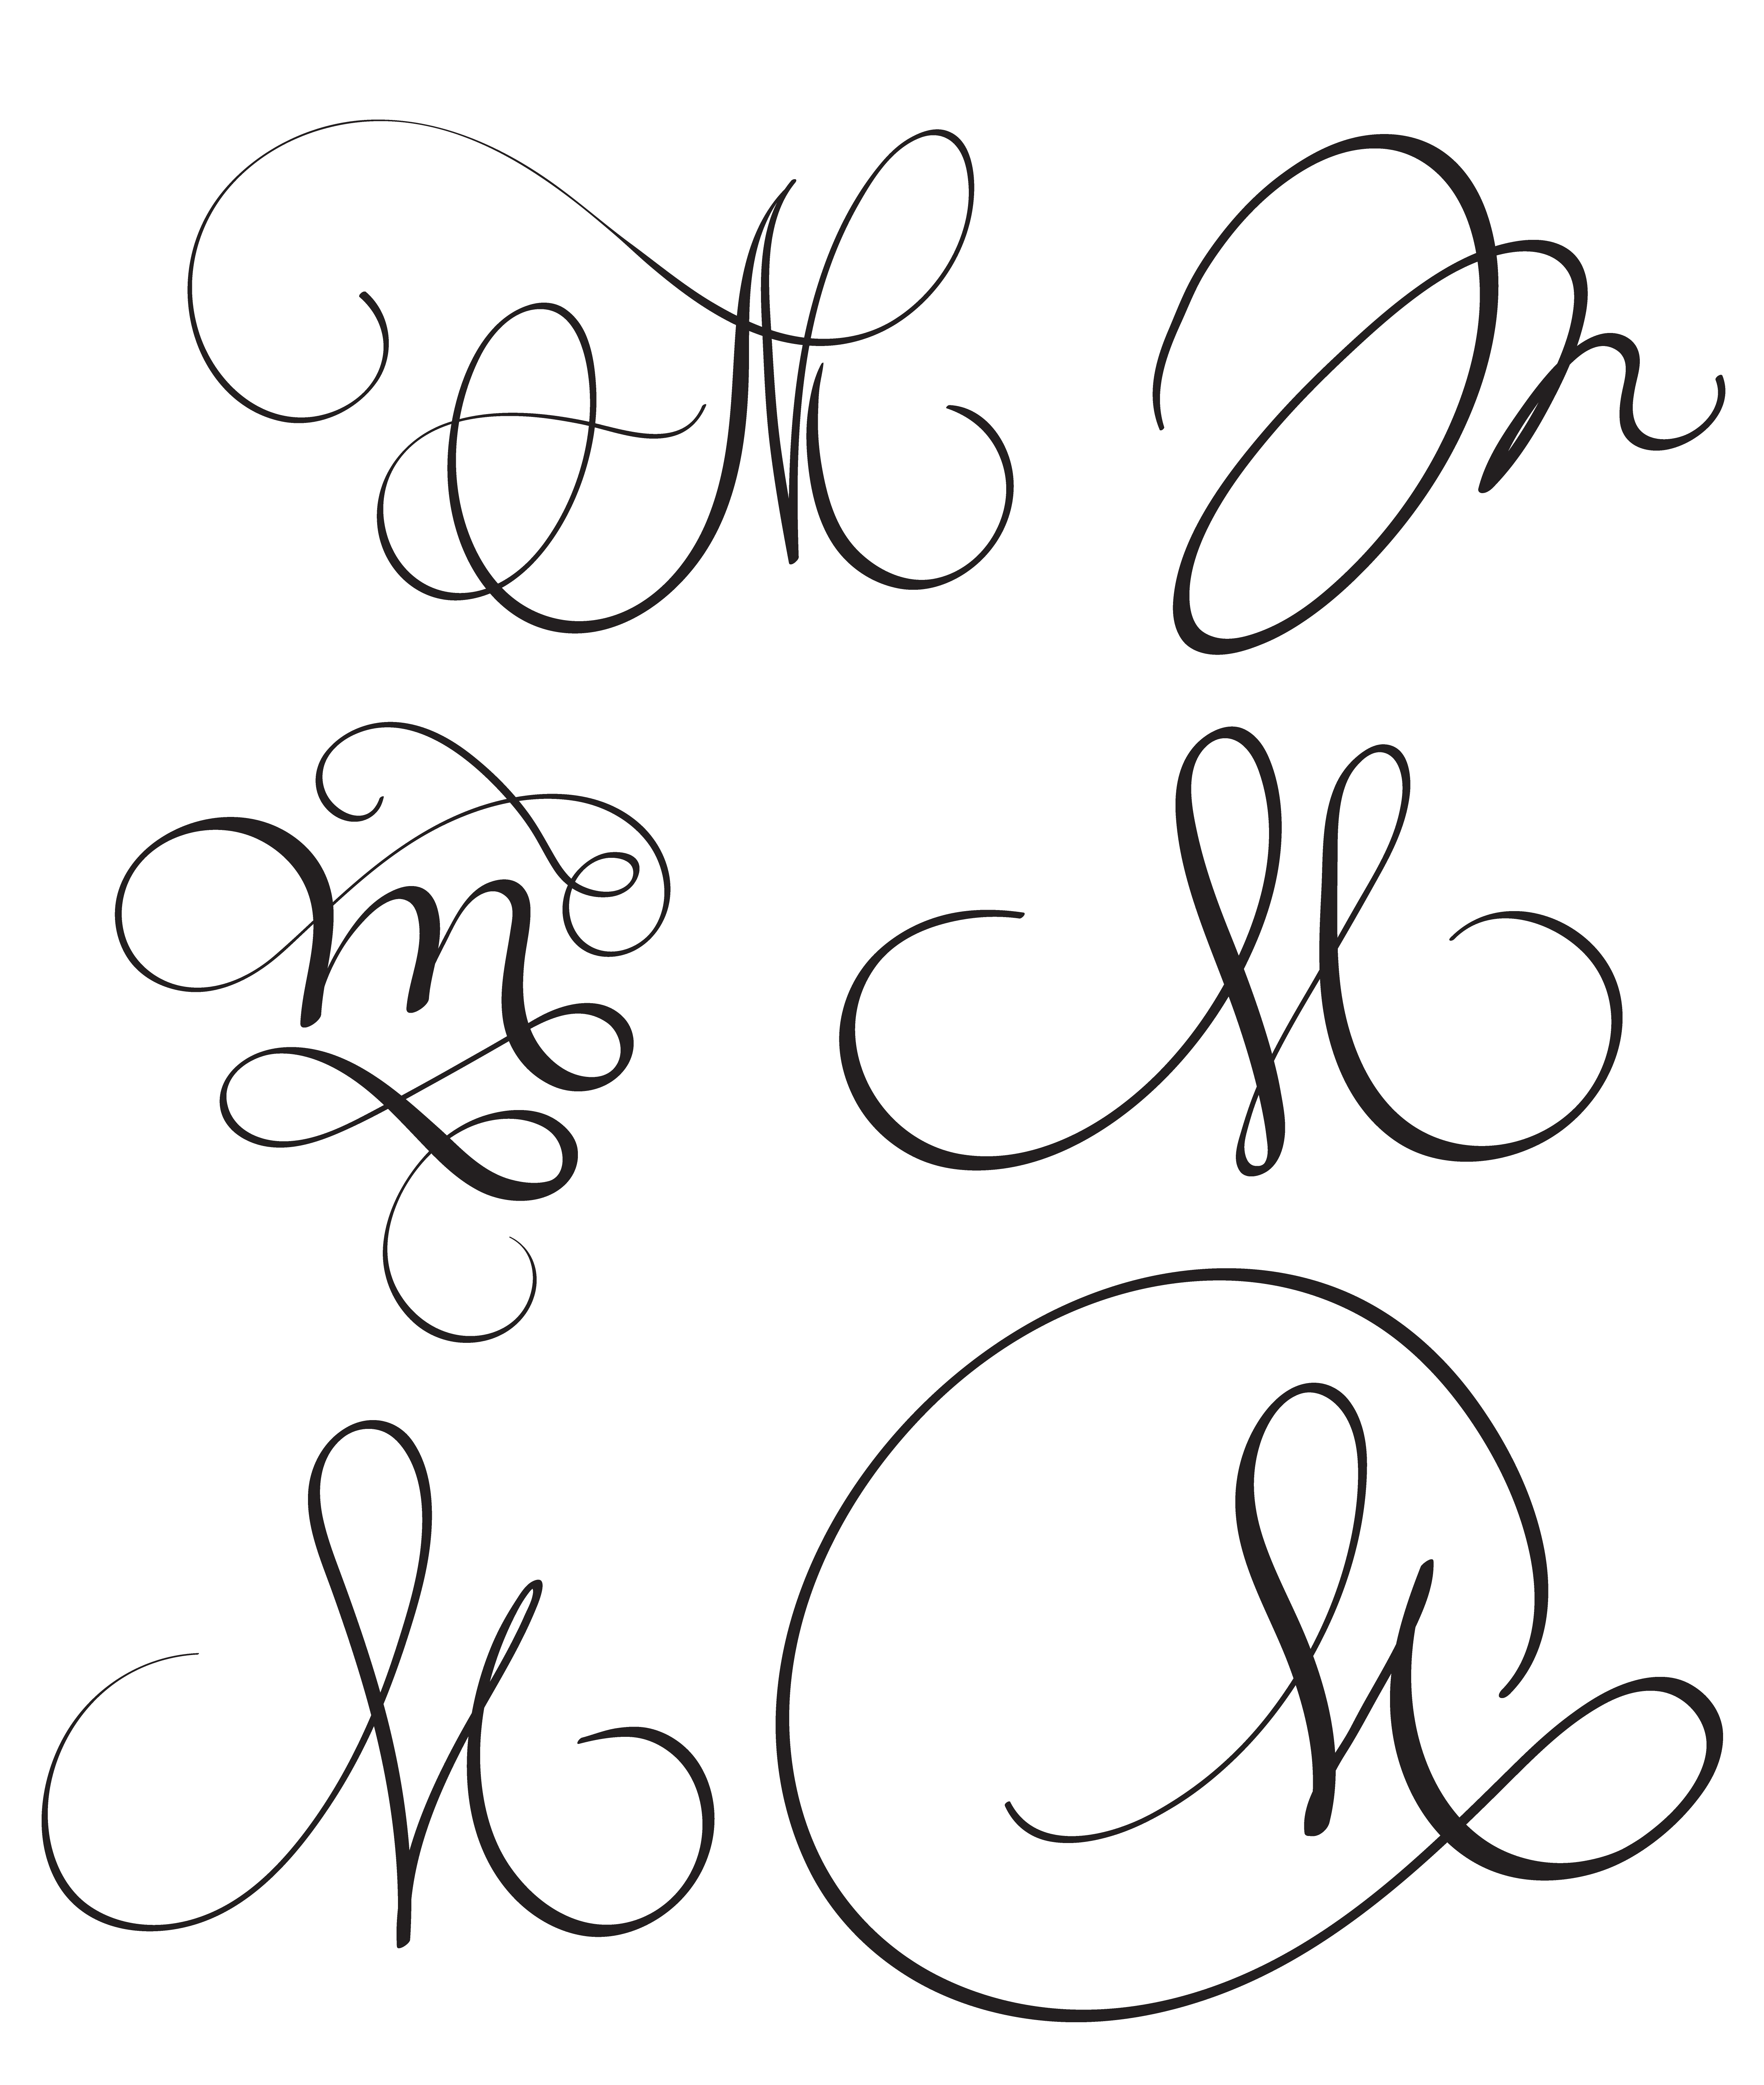 Set Of Art Calligraphy Letter M With Flourish Of Vintage Decorative Whorls Vector Illustration Eps10 Vector Art At Vecteezy